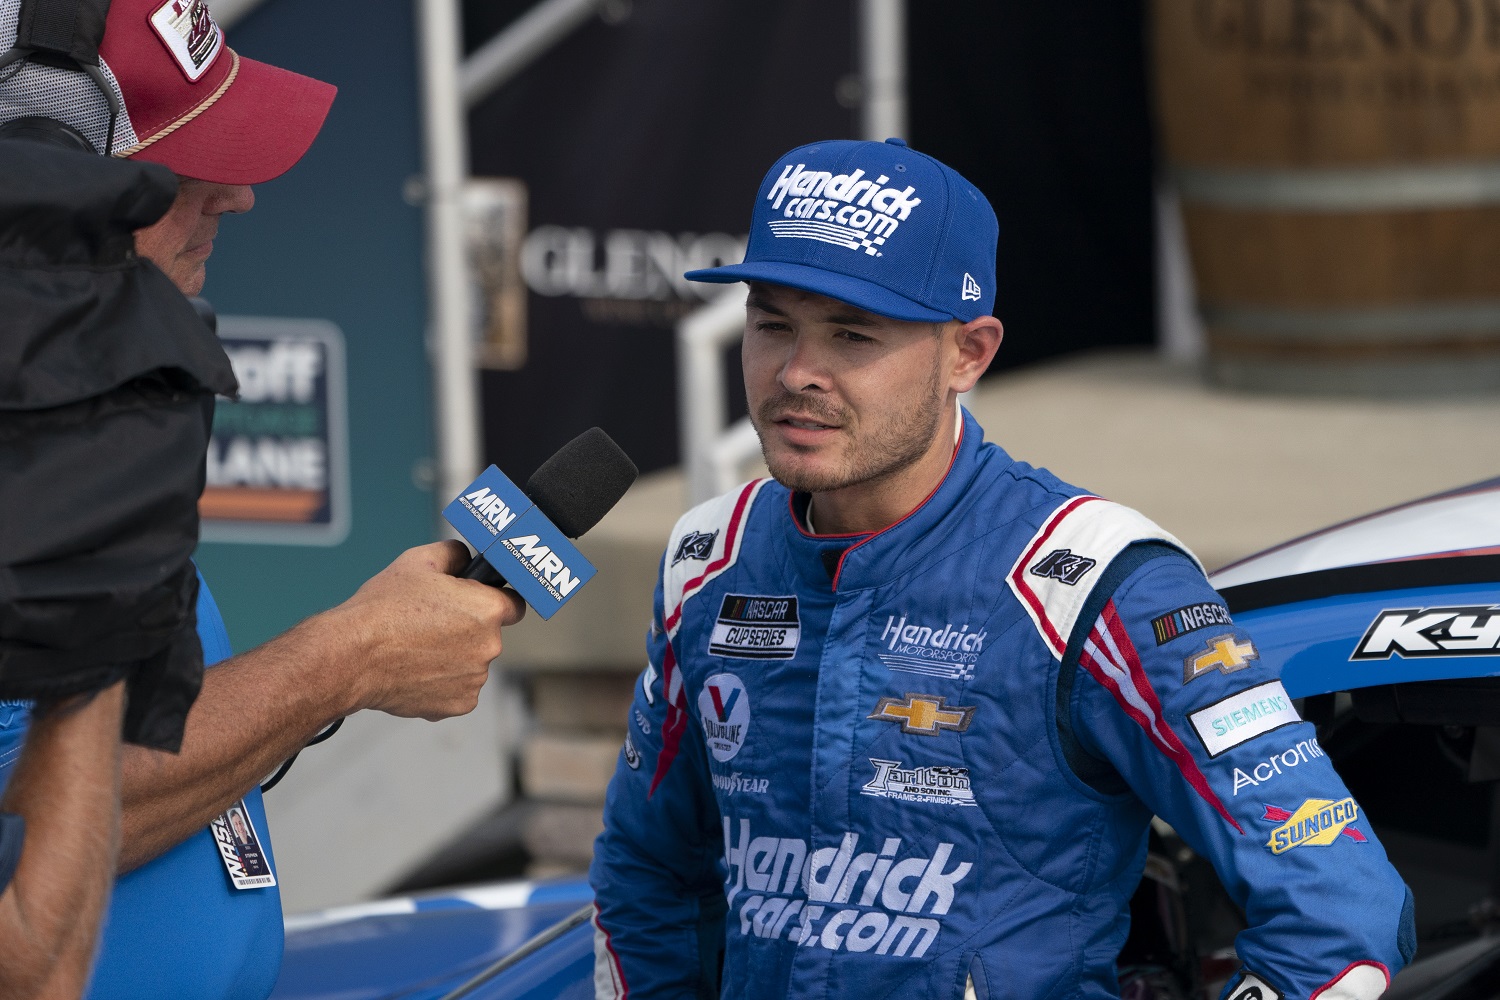 NASCAR Cup Series driver Kyle Larson gives an interview in victory lane after winning the Go Bowling at The Glen race on Aug. 8, 2021.